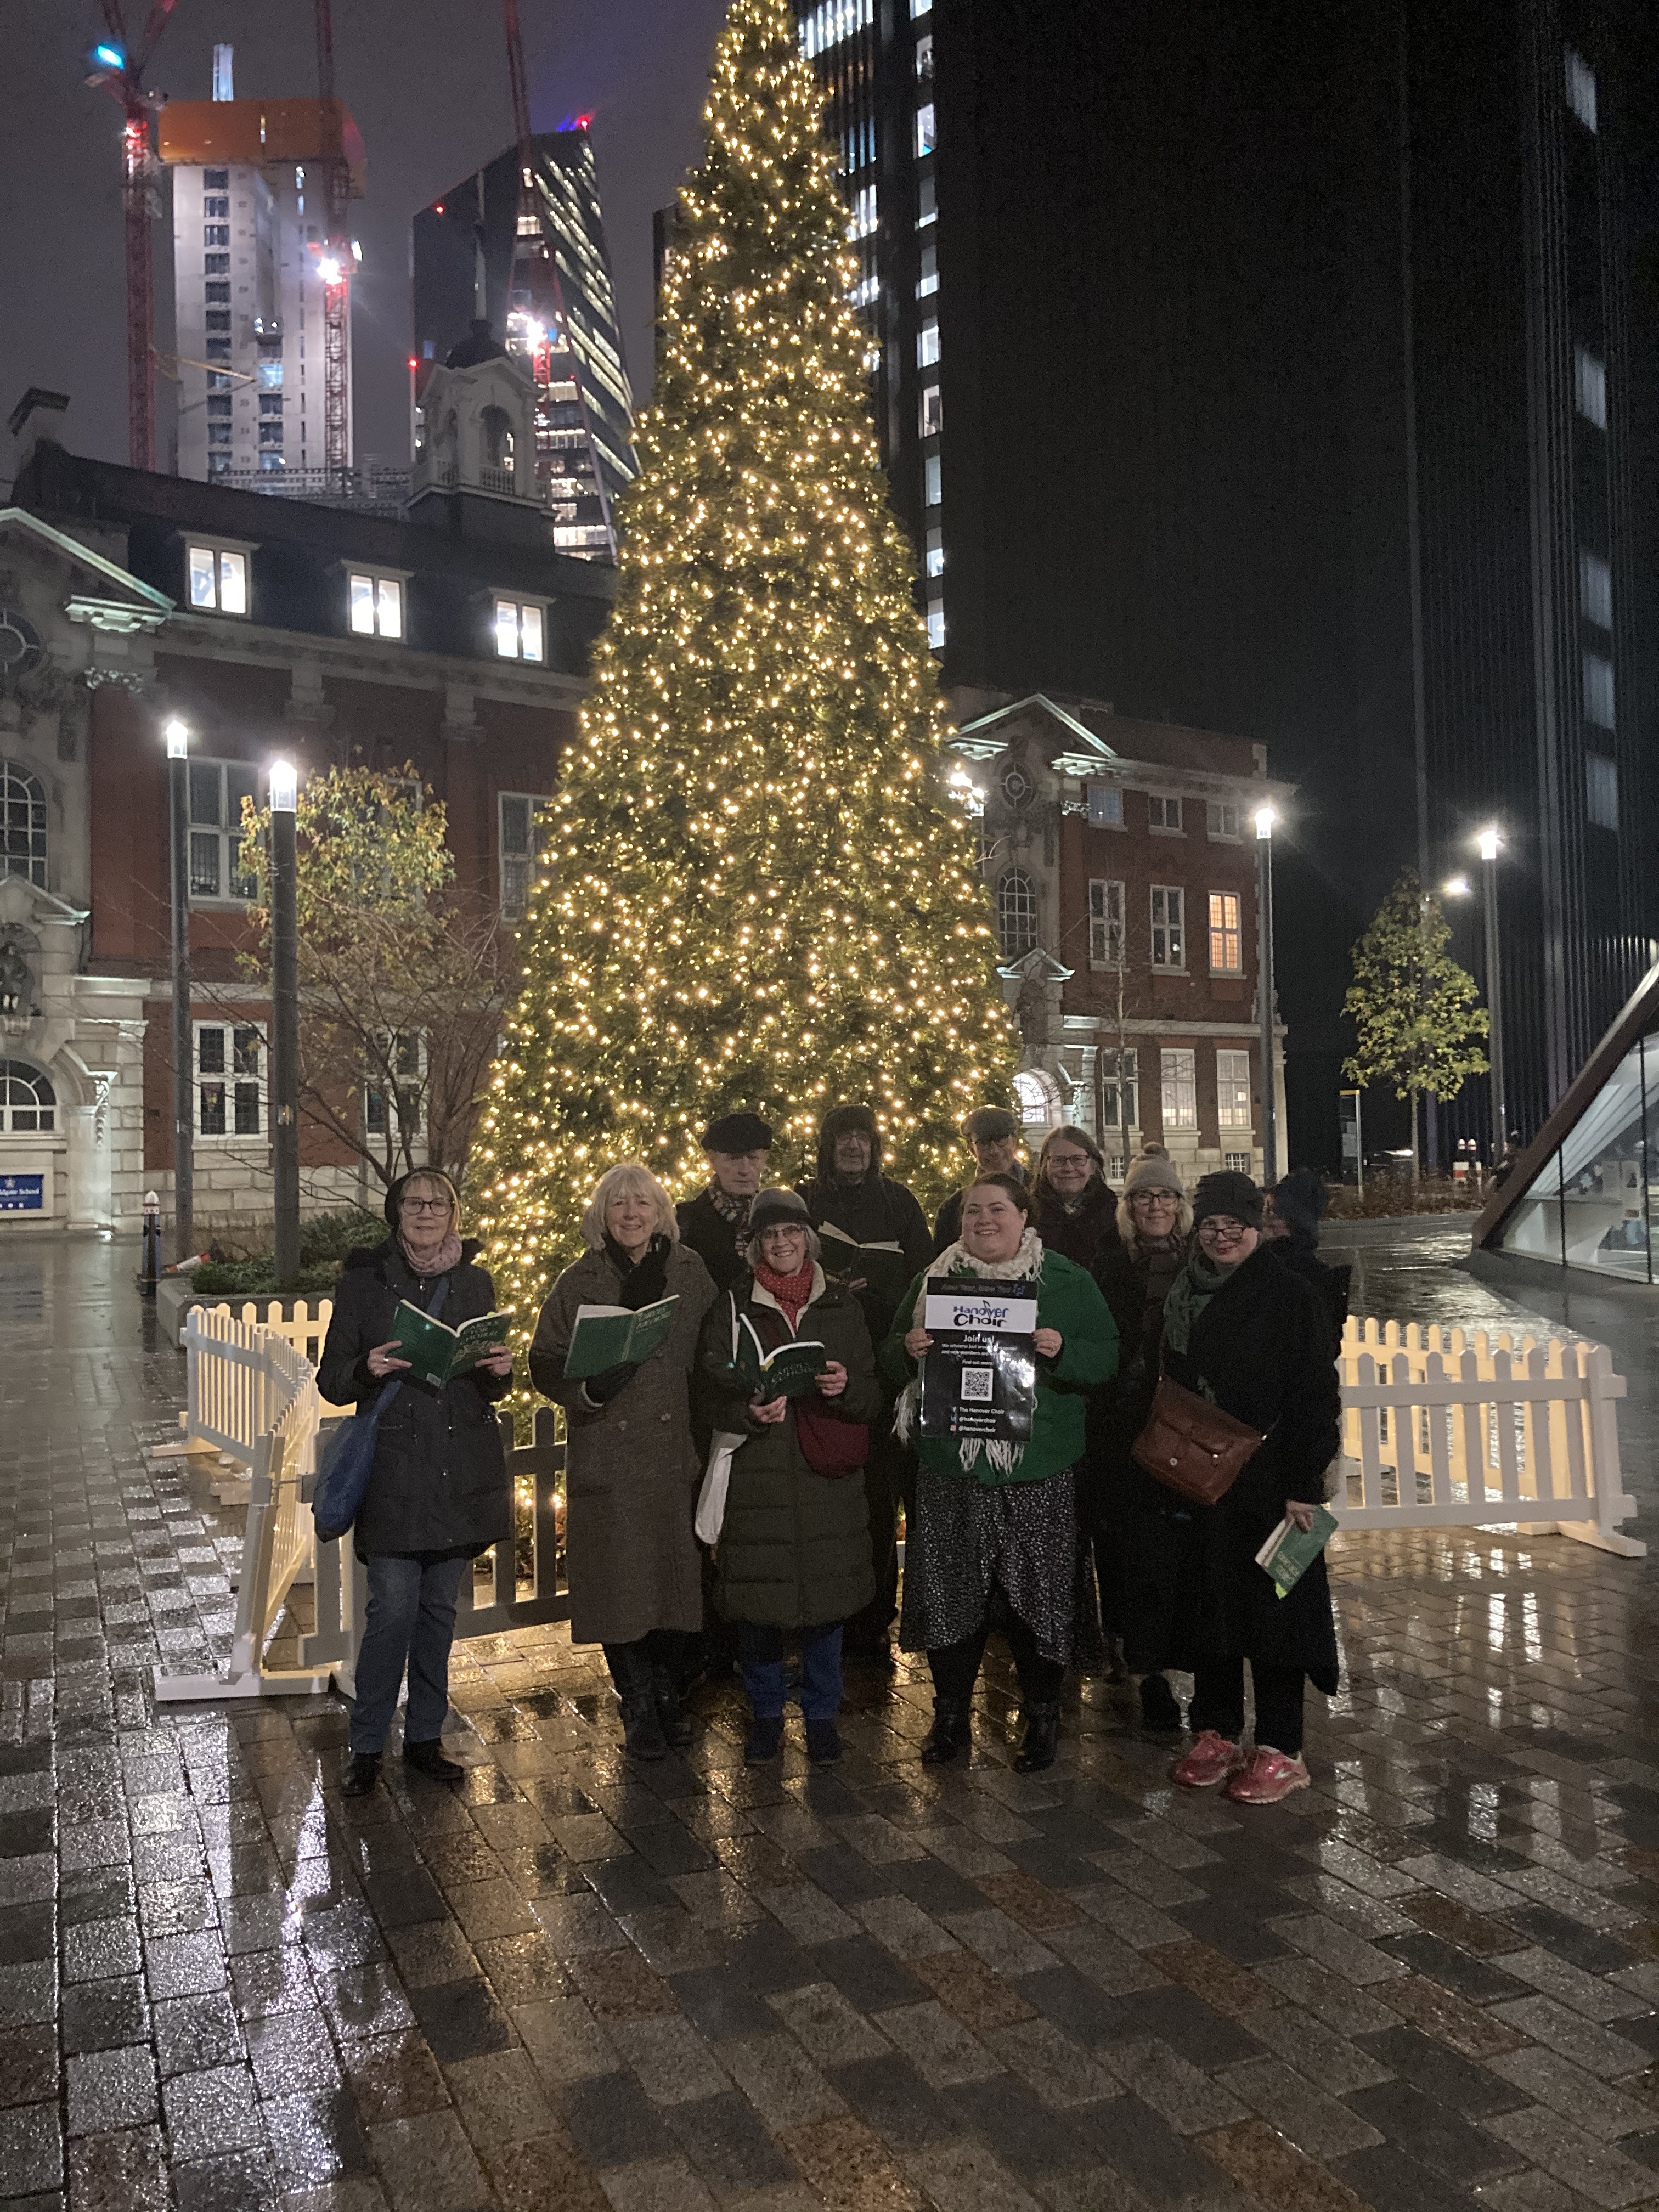 Choir carolling in front of a Christmas tree